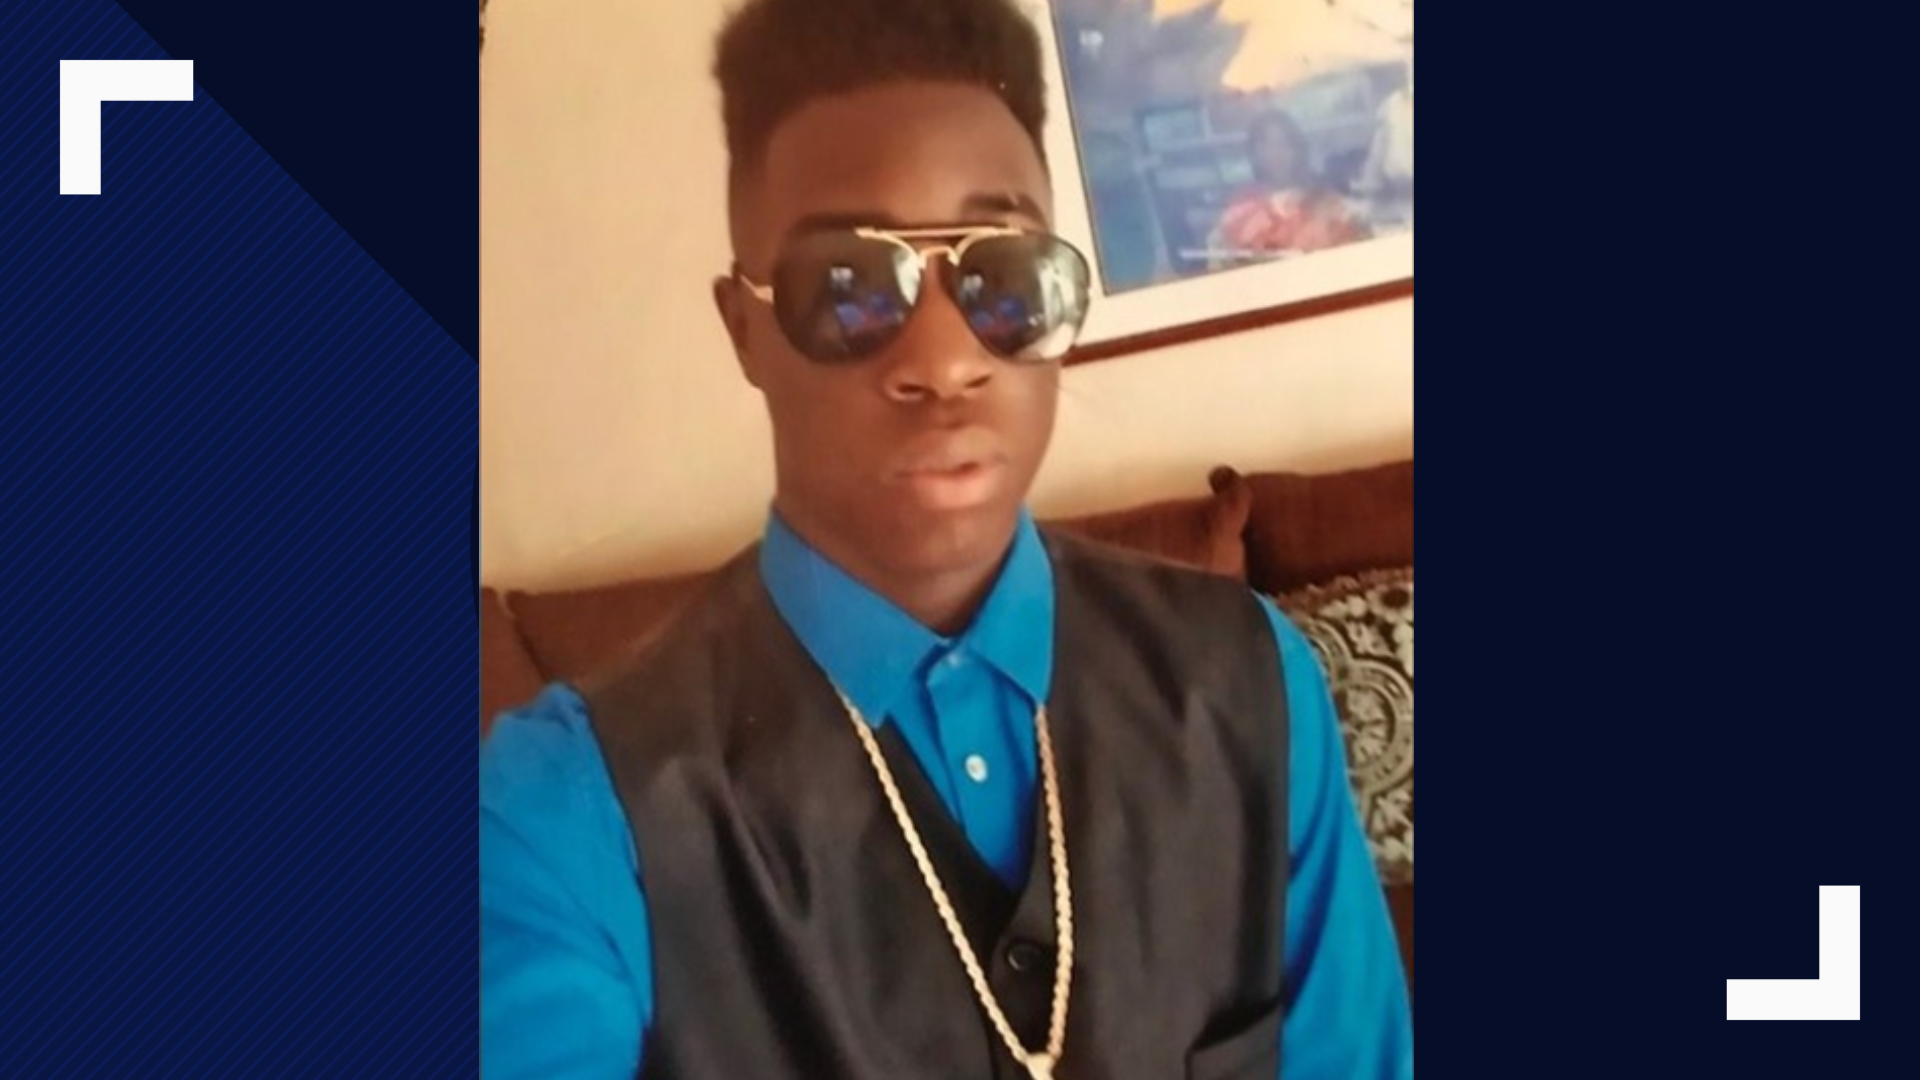 Family and friends celebrated and remembered James Currie Jr. He was a Dudley High student who was shot and killed Sunday, March 24. No arrest has been made.